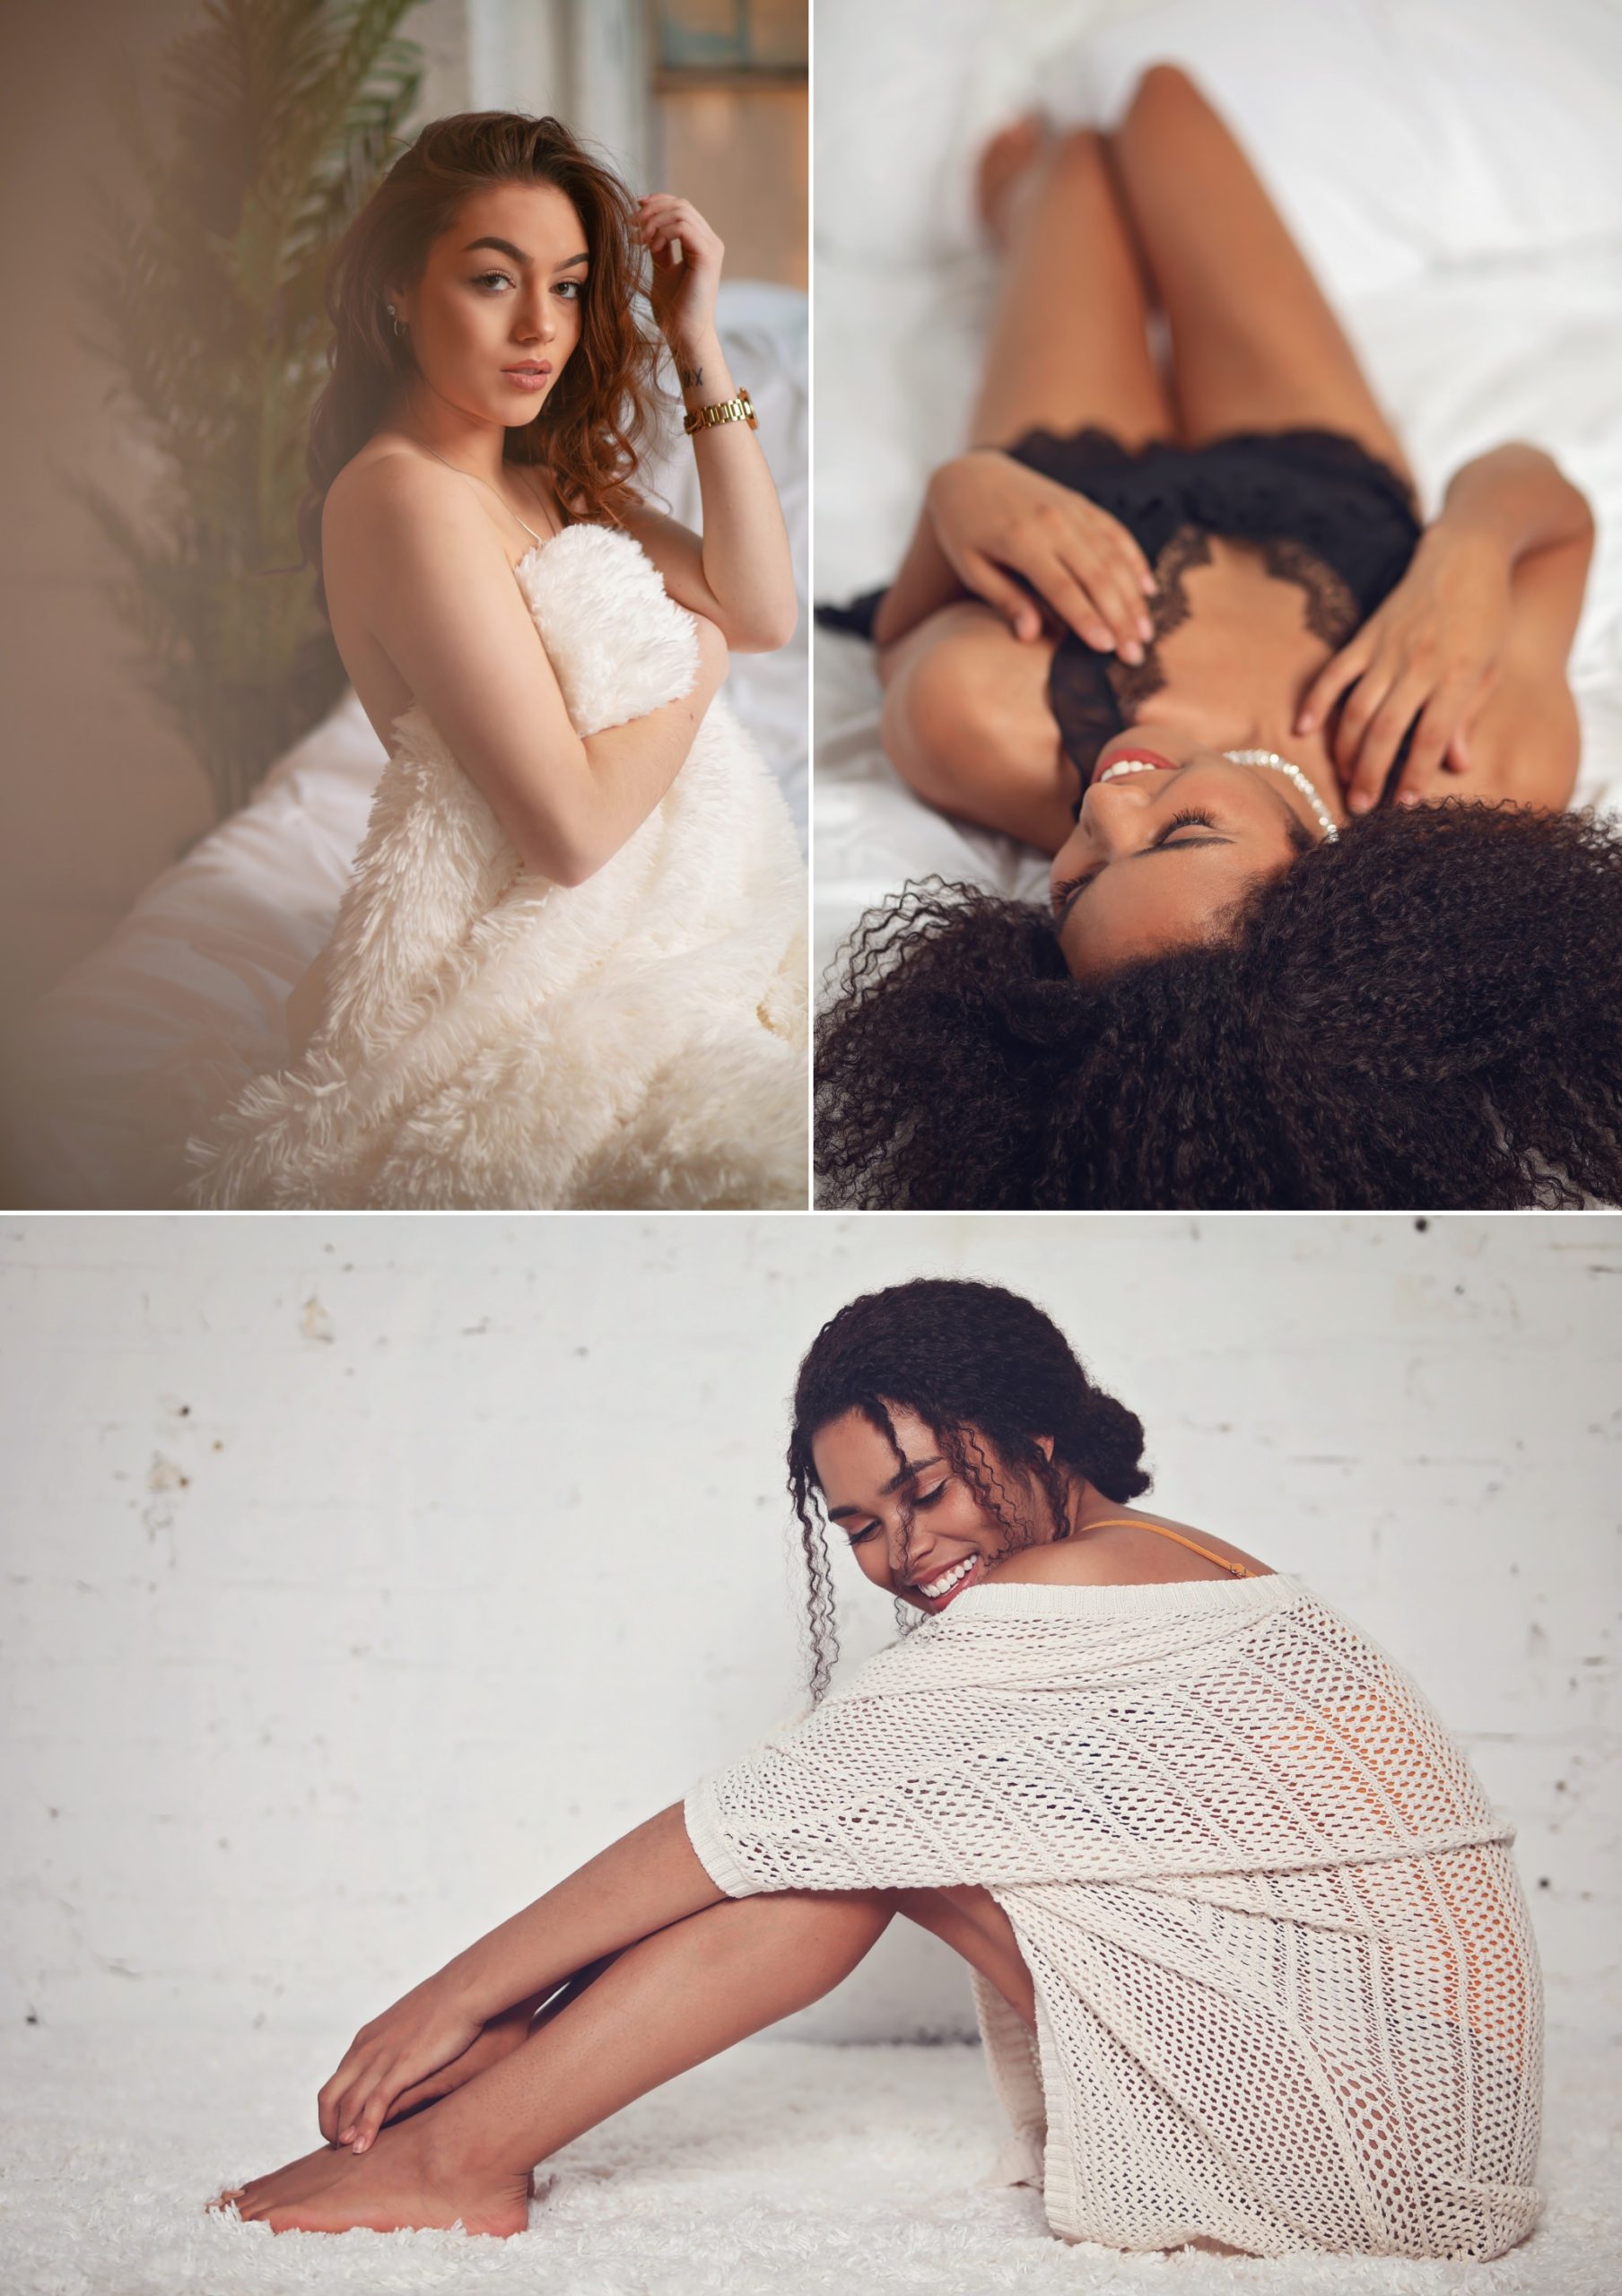 Boudoir Photography: Tips to get the best experience